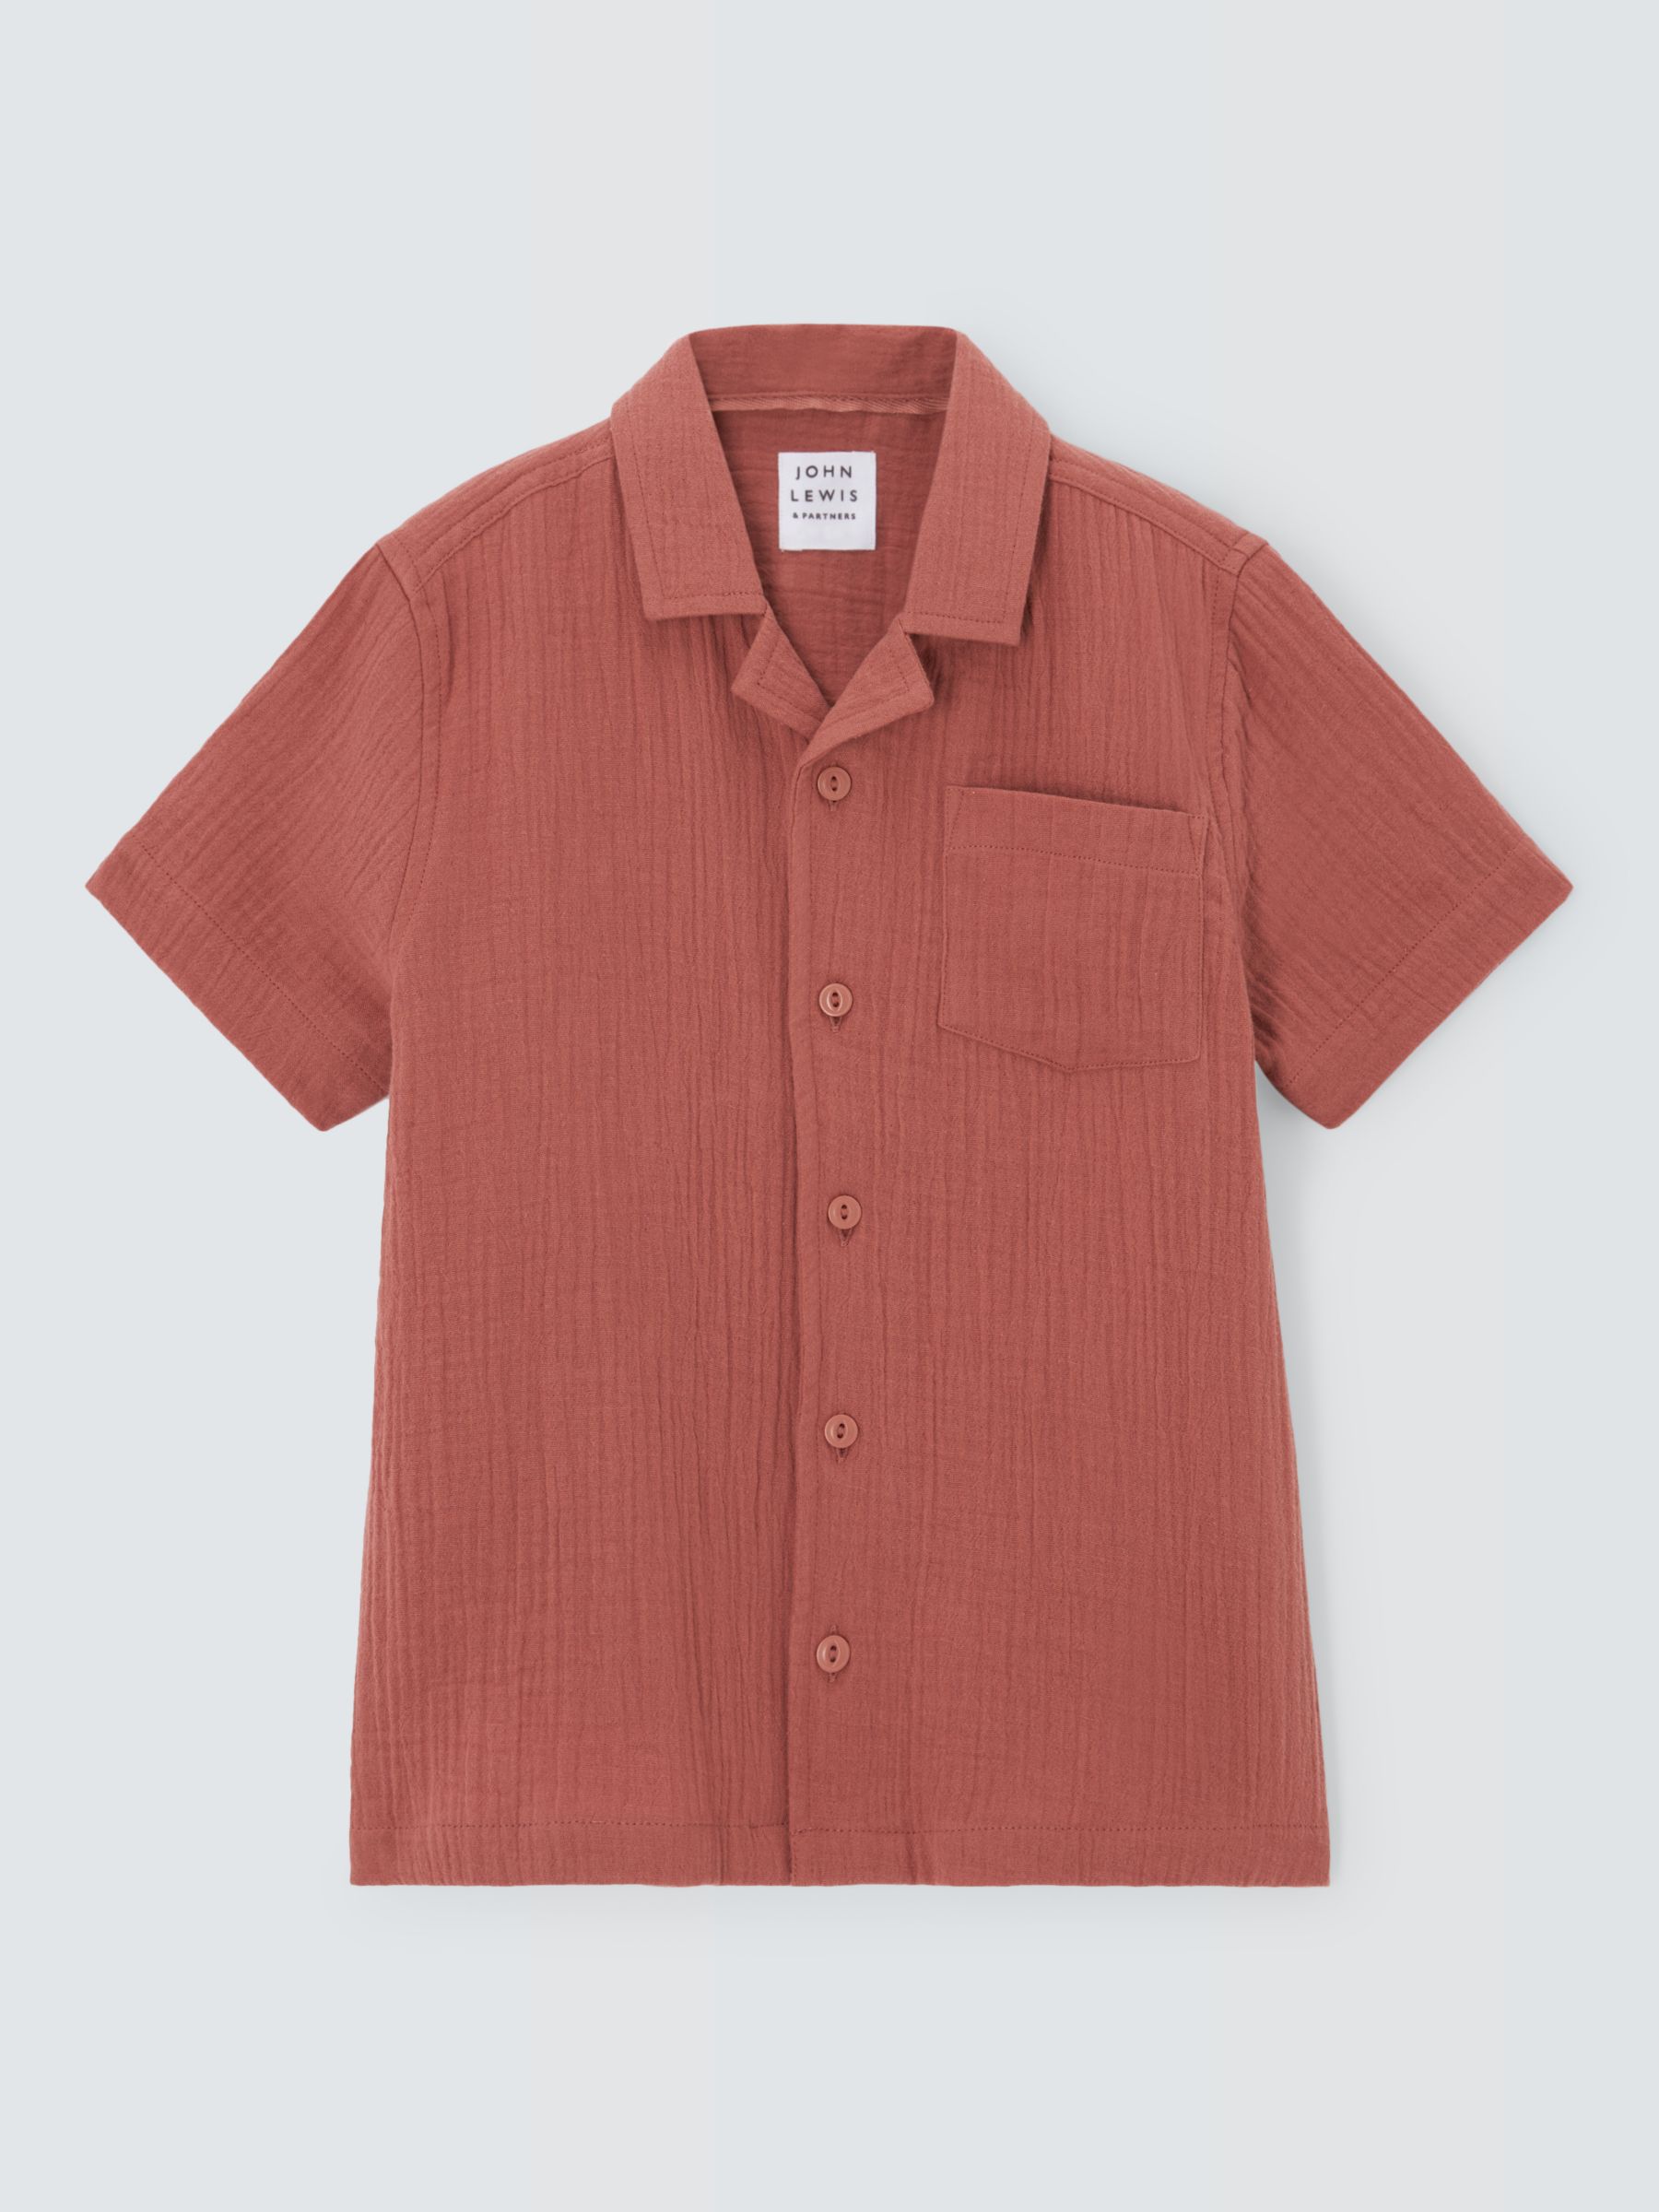 John Lewis Kids' Cheesecloth Cotton Short Sleeve Shirt, Red, 6 years